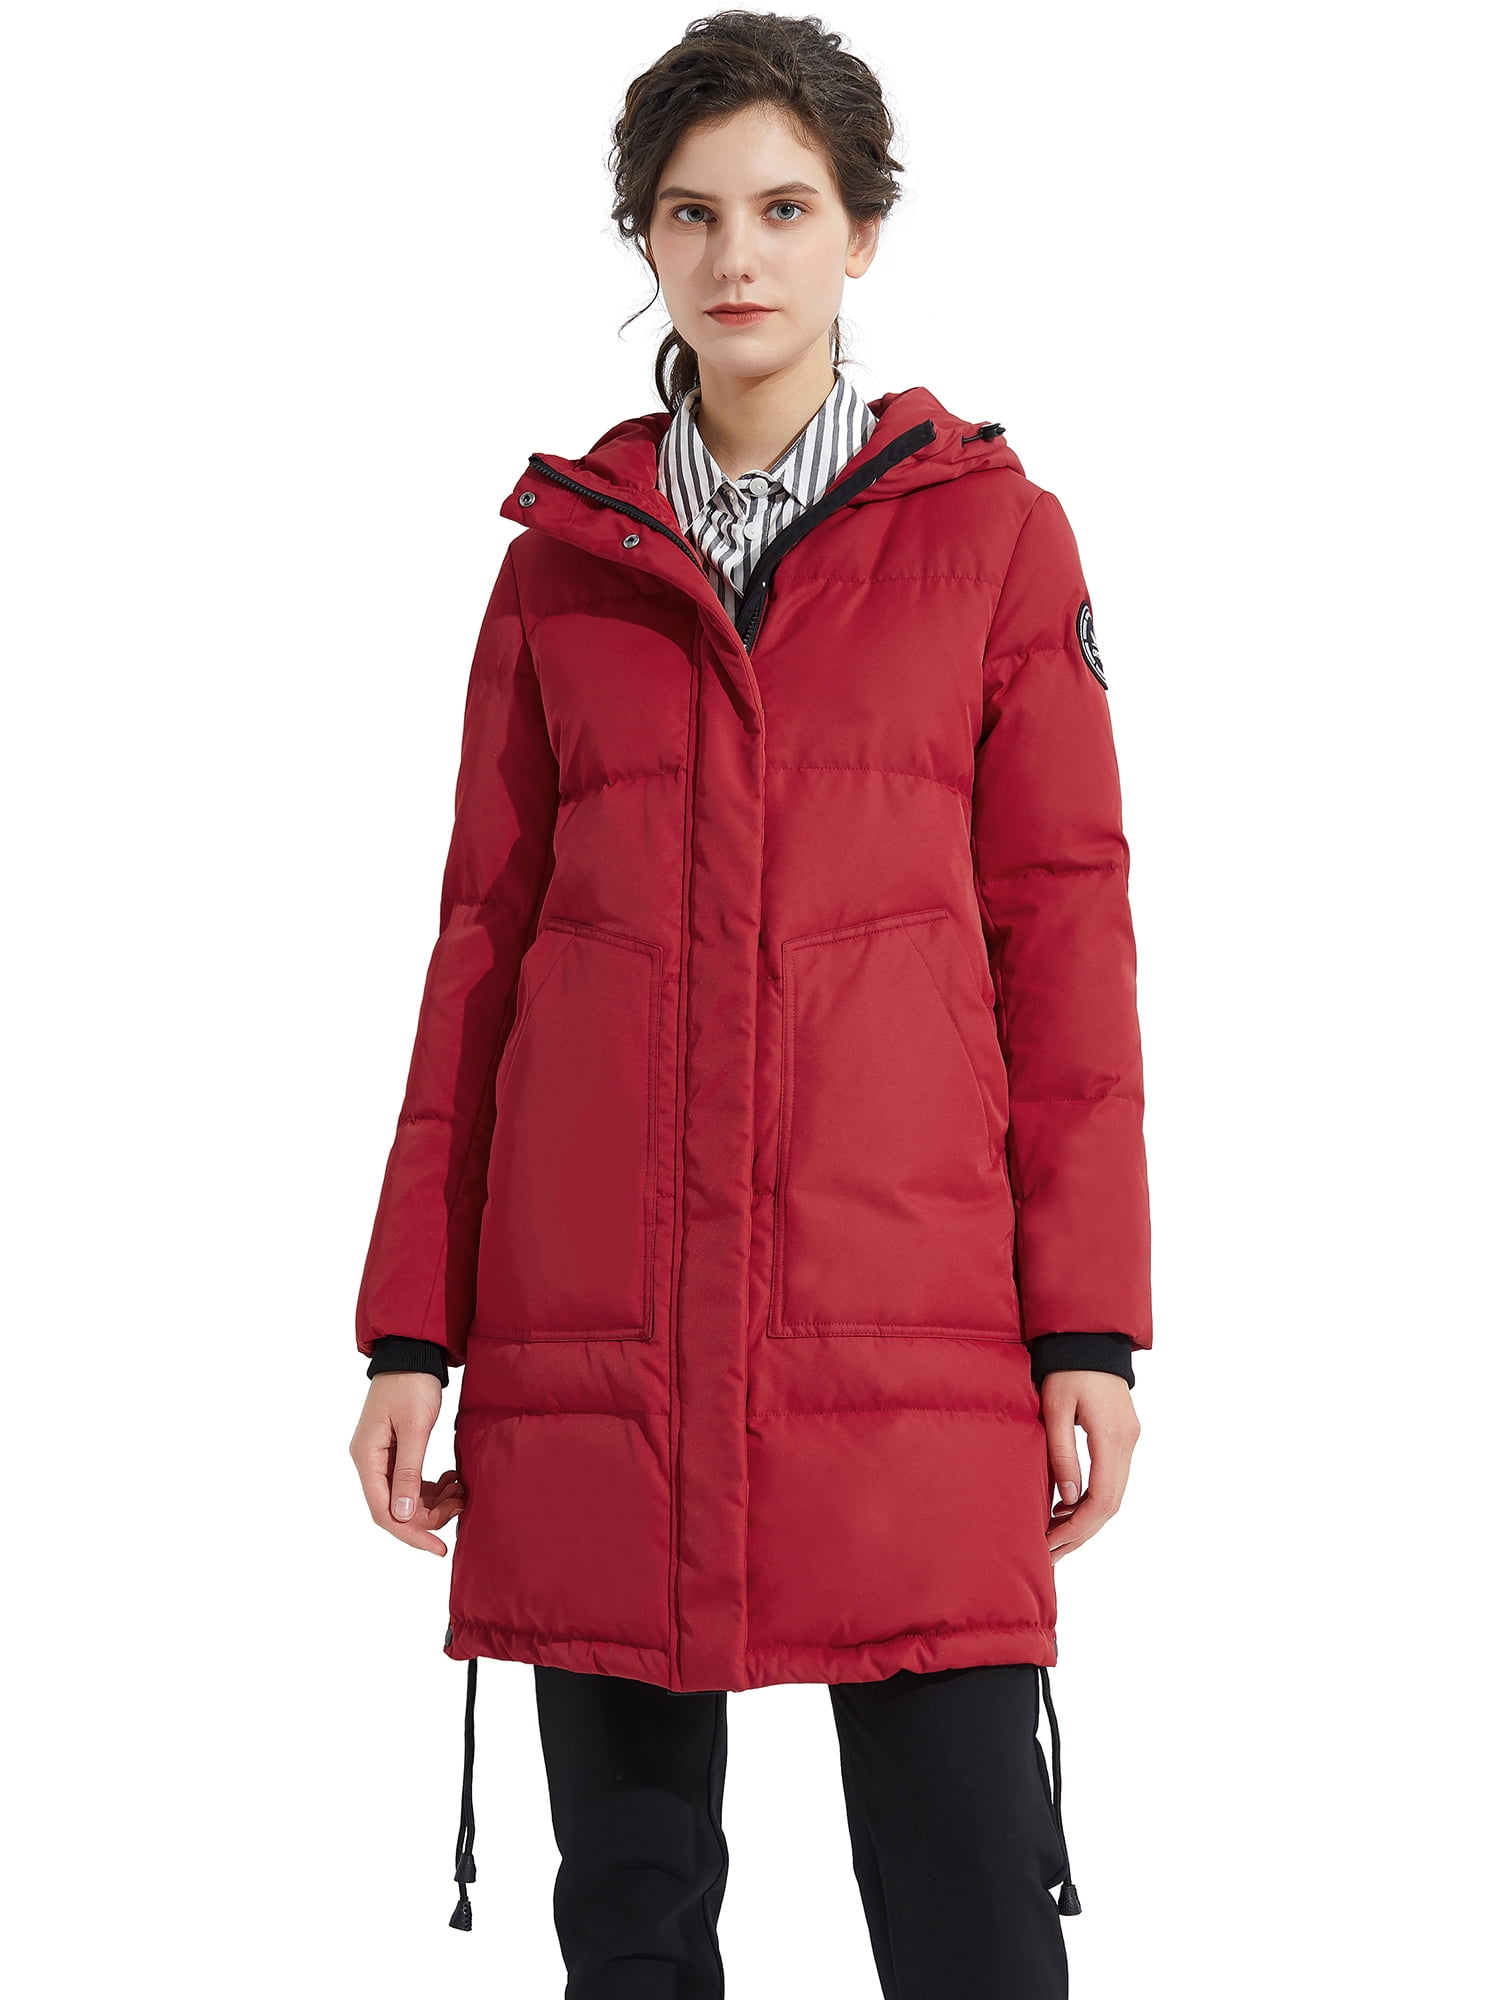 Orolay Women's Winter Down Coat Long Down Jacket Double Snap Puffer ...